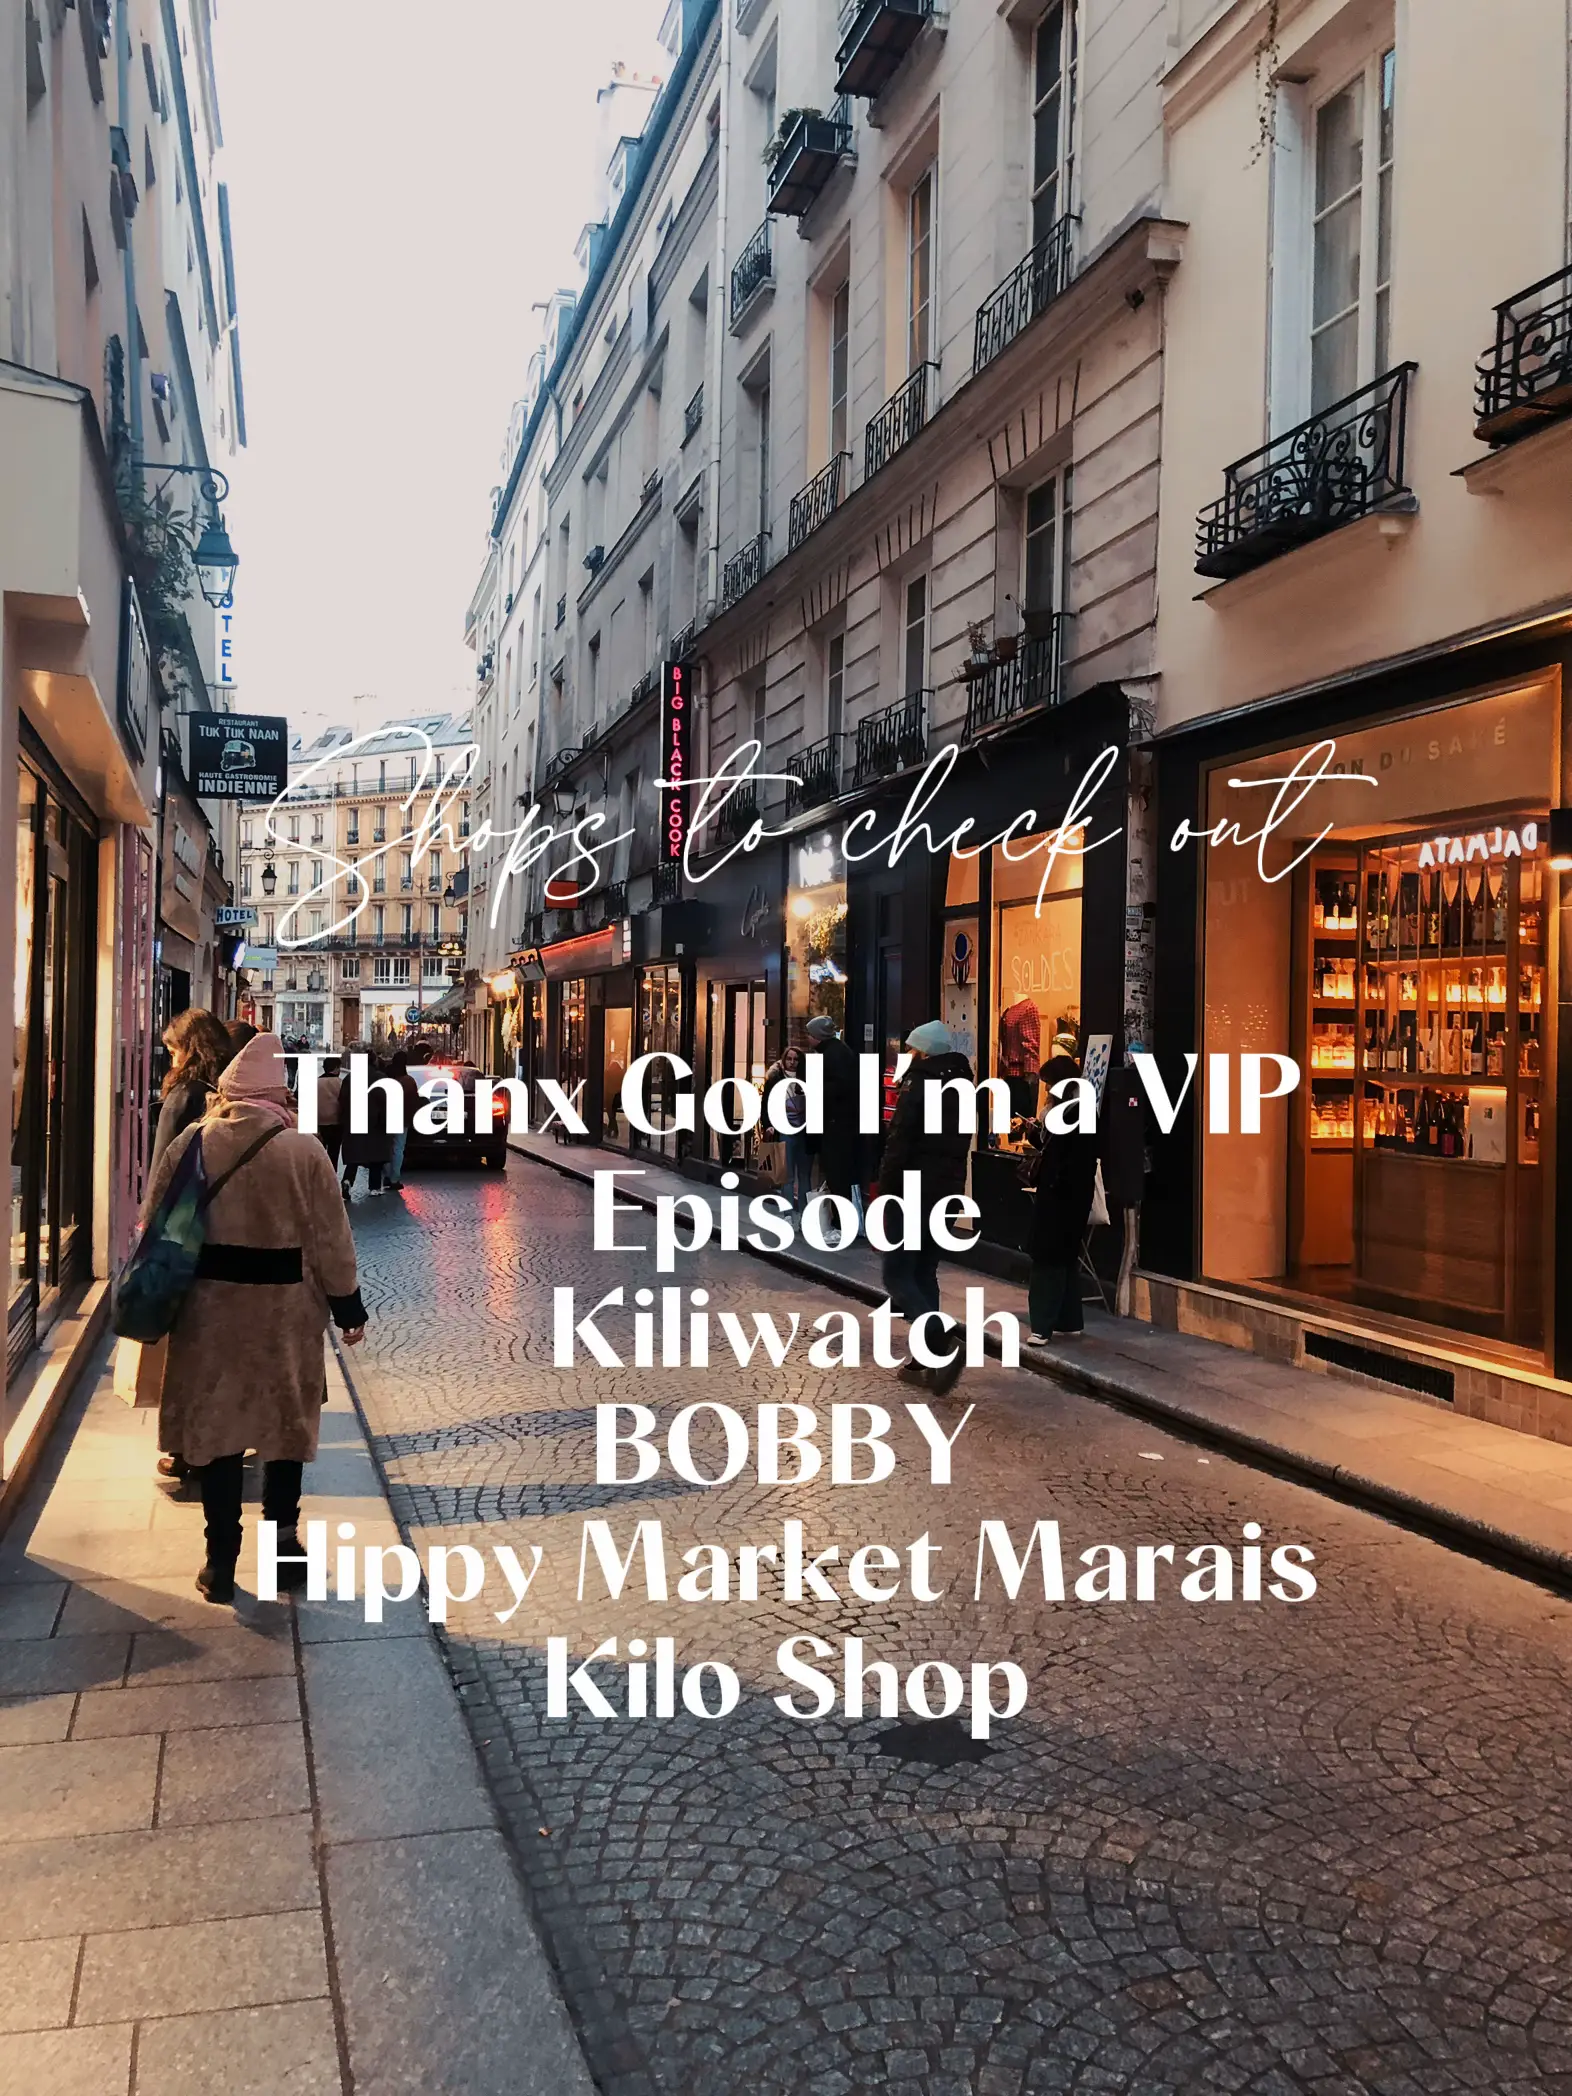 EBY - Introducing: VIP SHOPPING EXPERIENCE✨. Once you join EBY